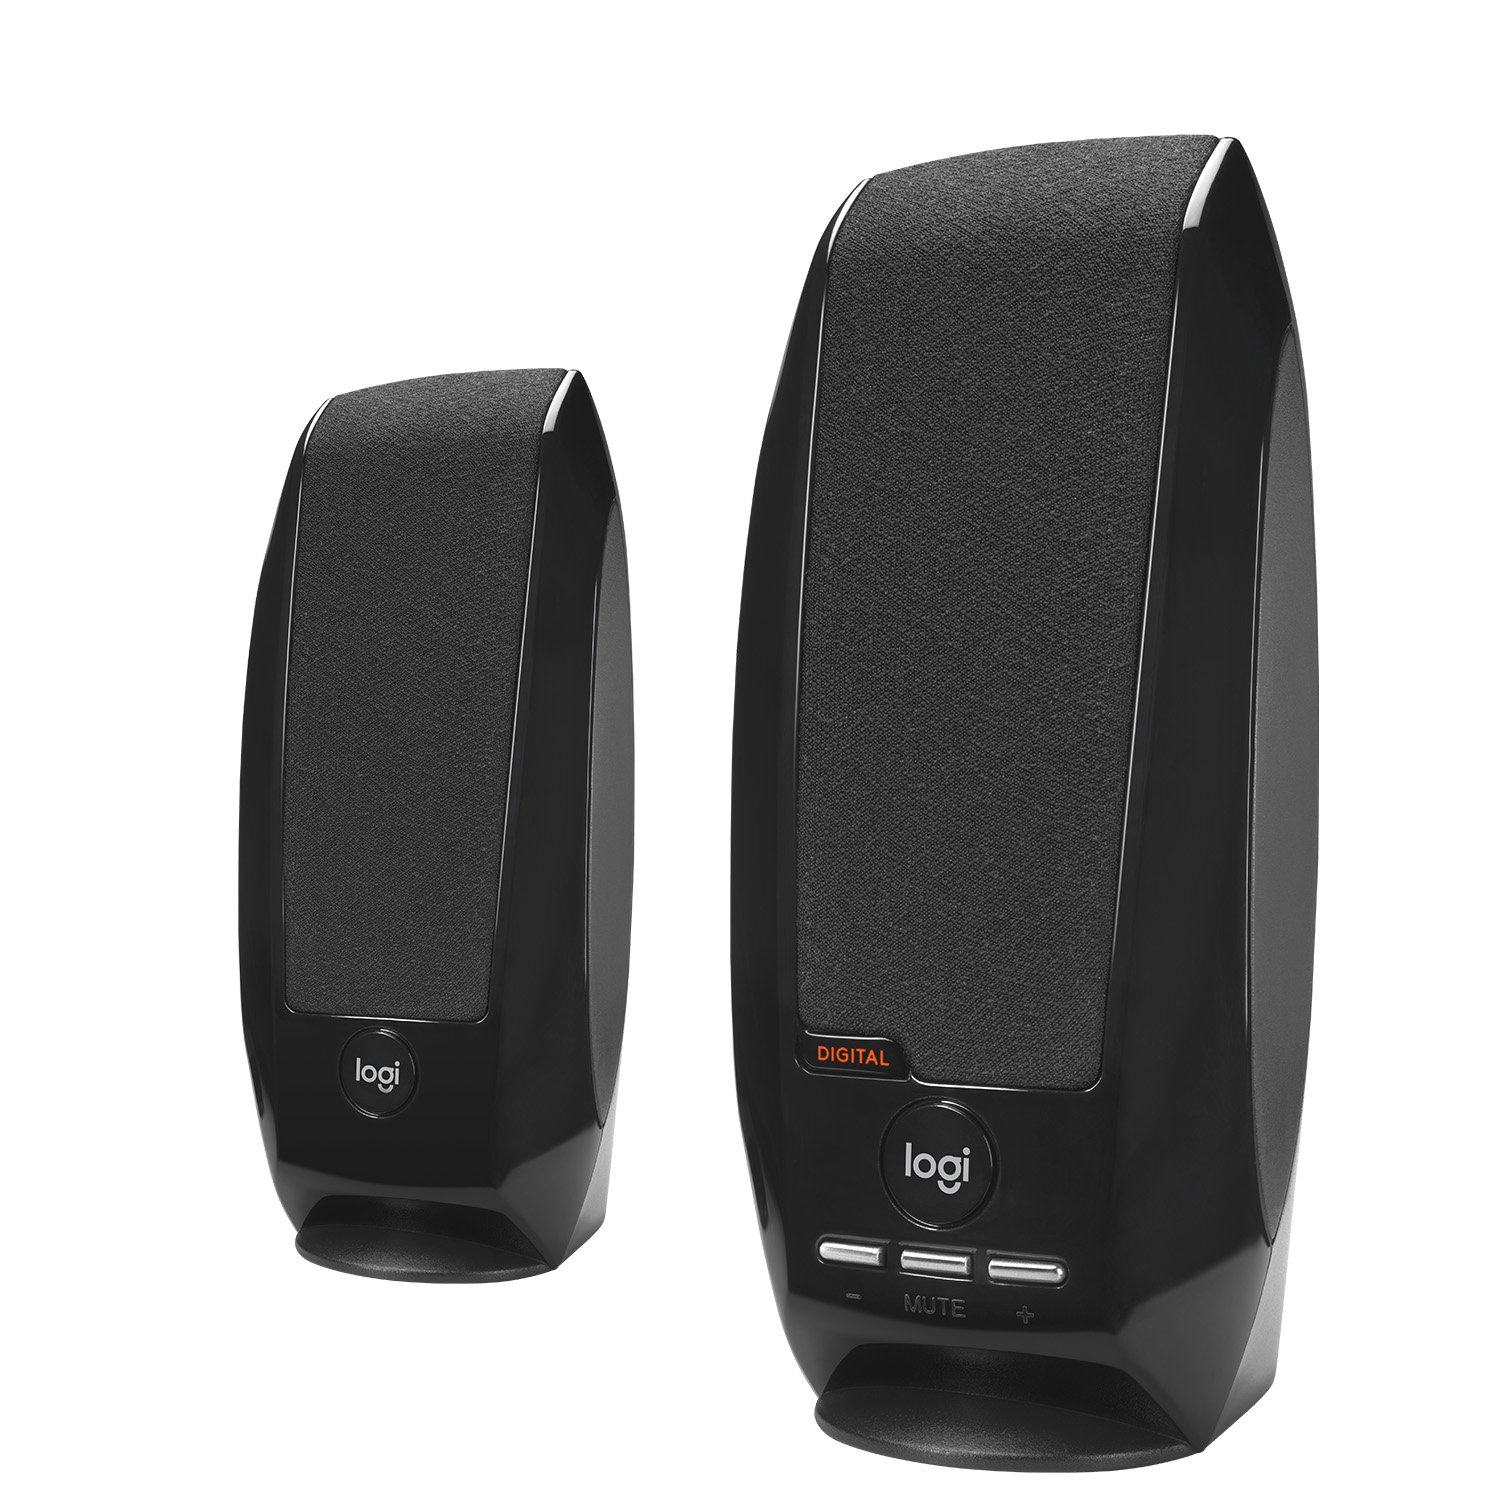 Logitech S150 USB Speakers with Digital Sound - image 3 of 5